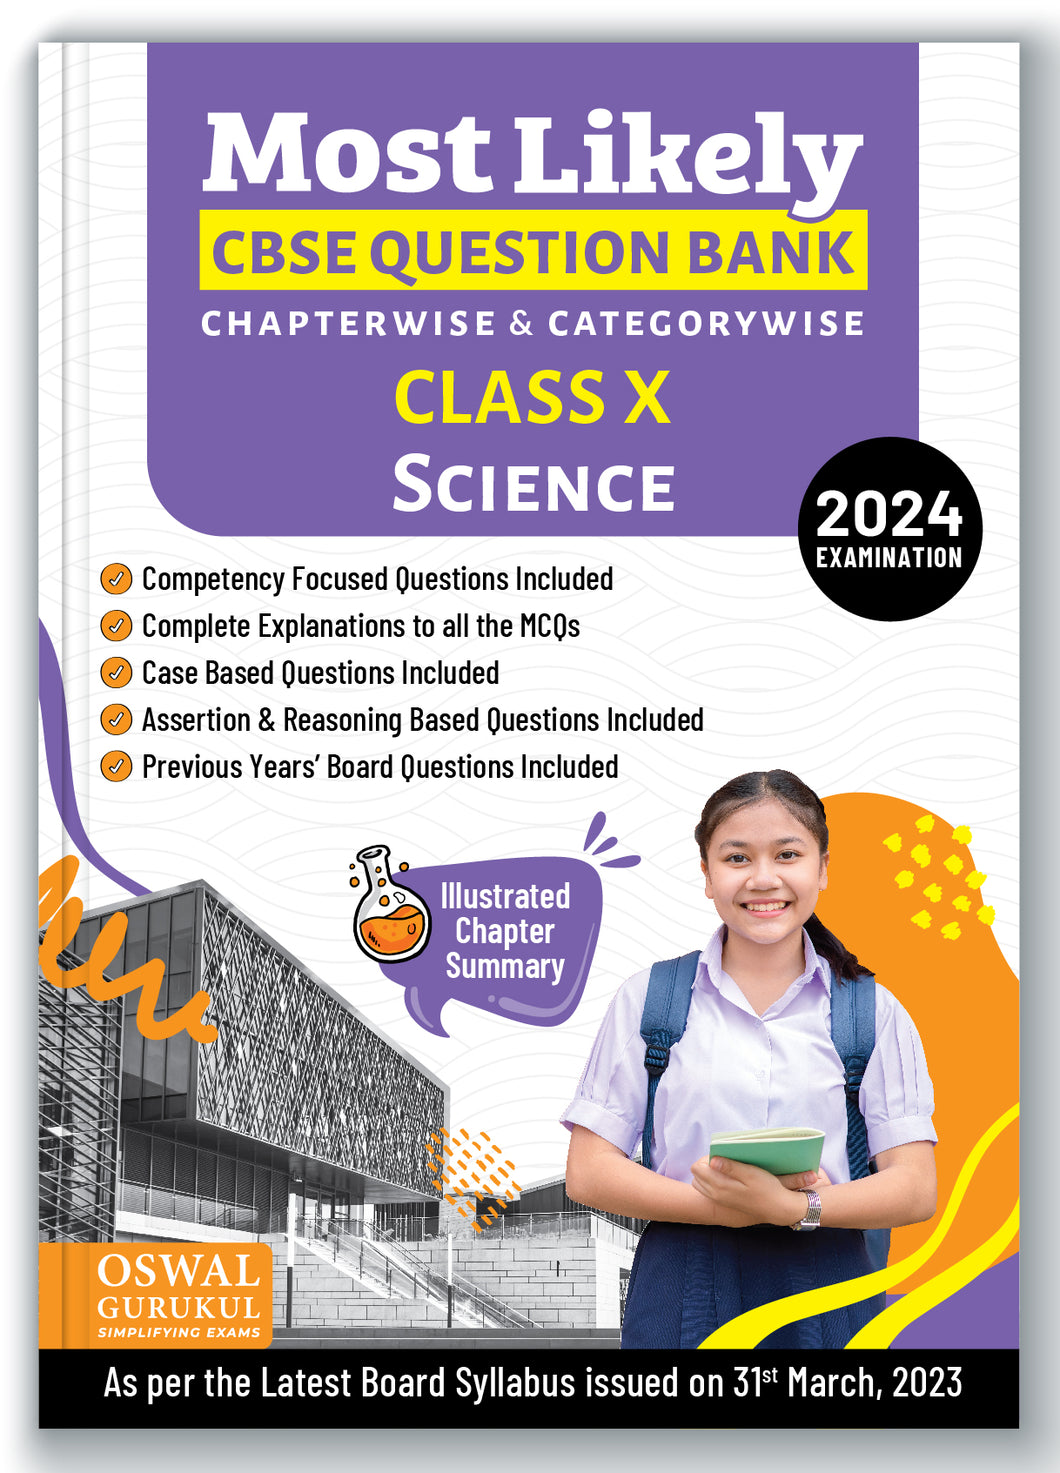 Oswal - Gurukul Science Most Likely Question Bank : CBSE Class 10 for 2024 Exam